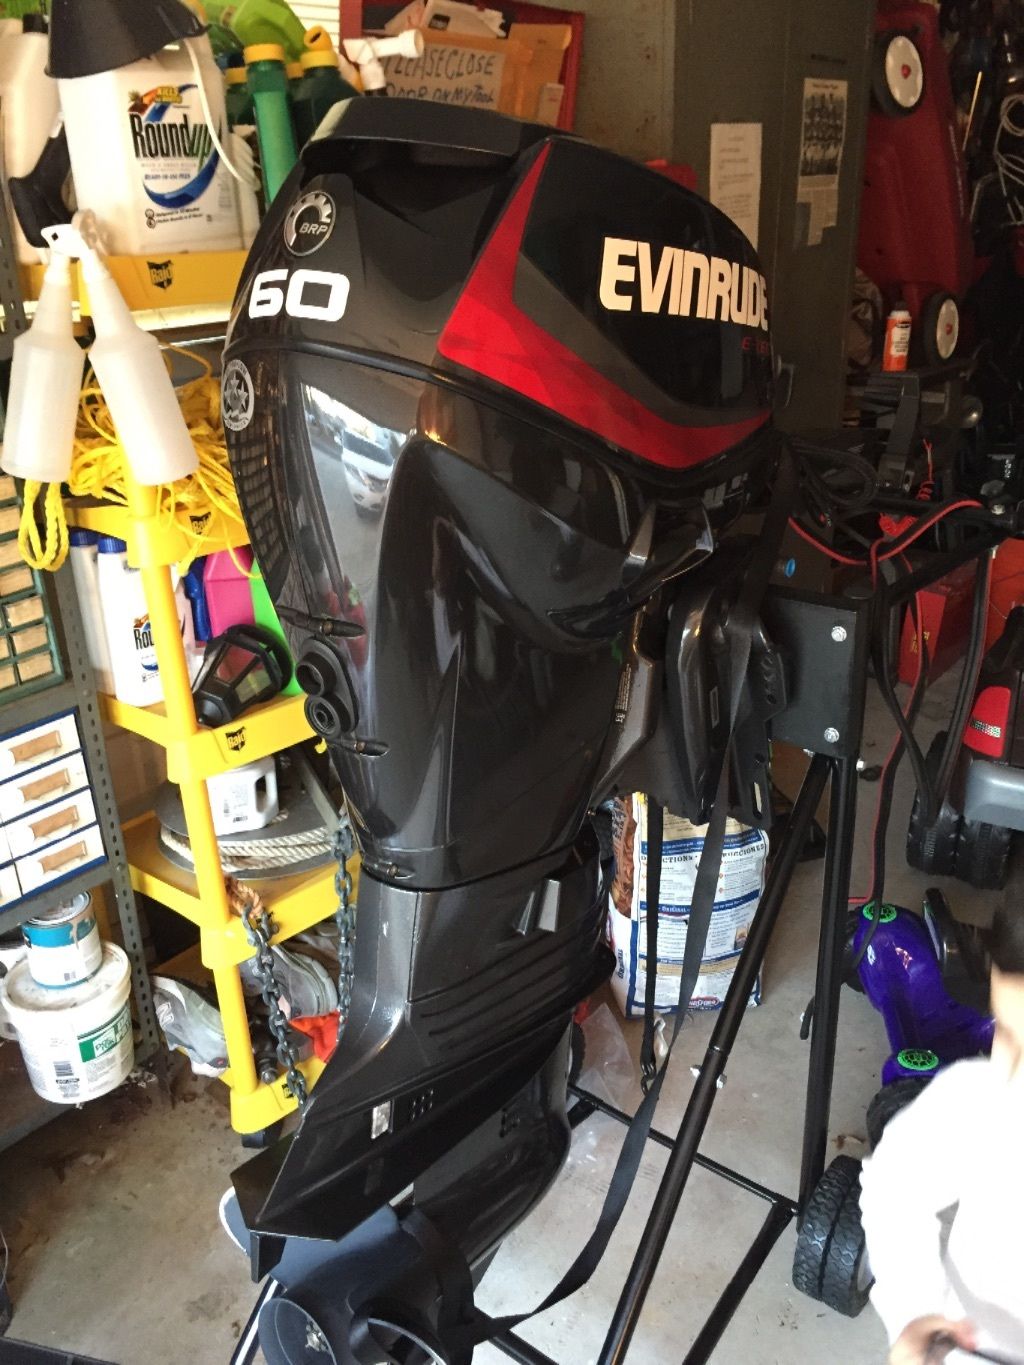 Evinrude 60 HP E-TEC 2015 for sale for $5,250 - Boats-from-USA.com